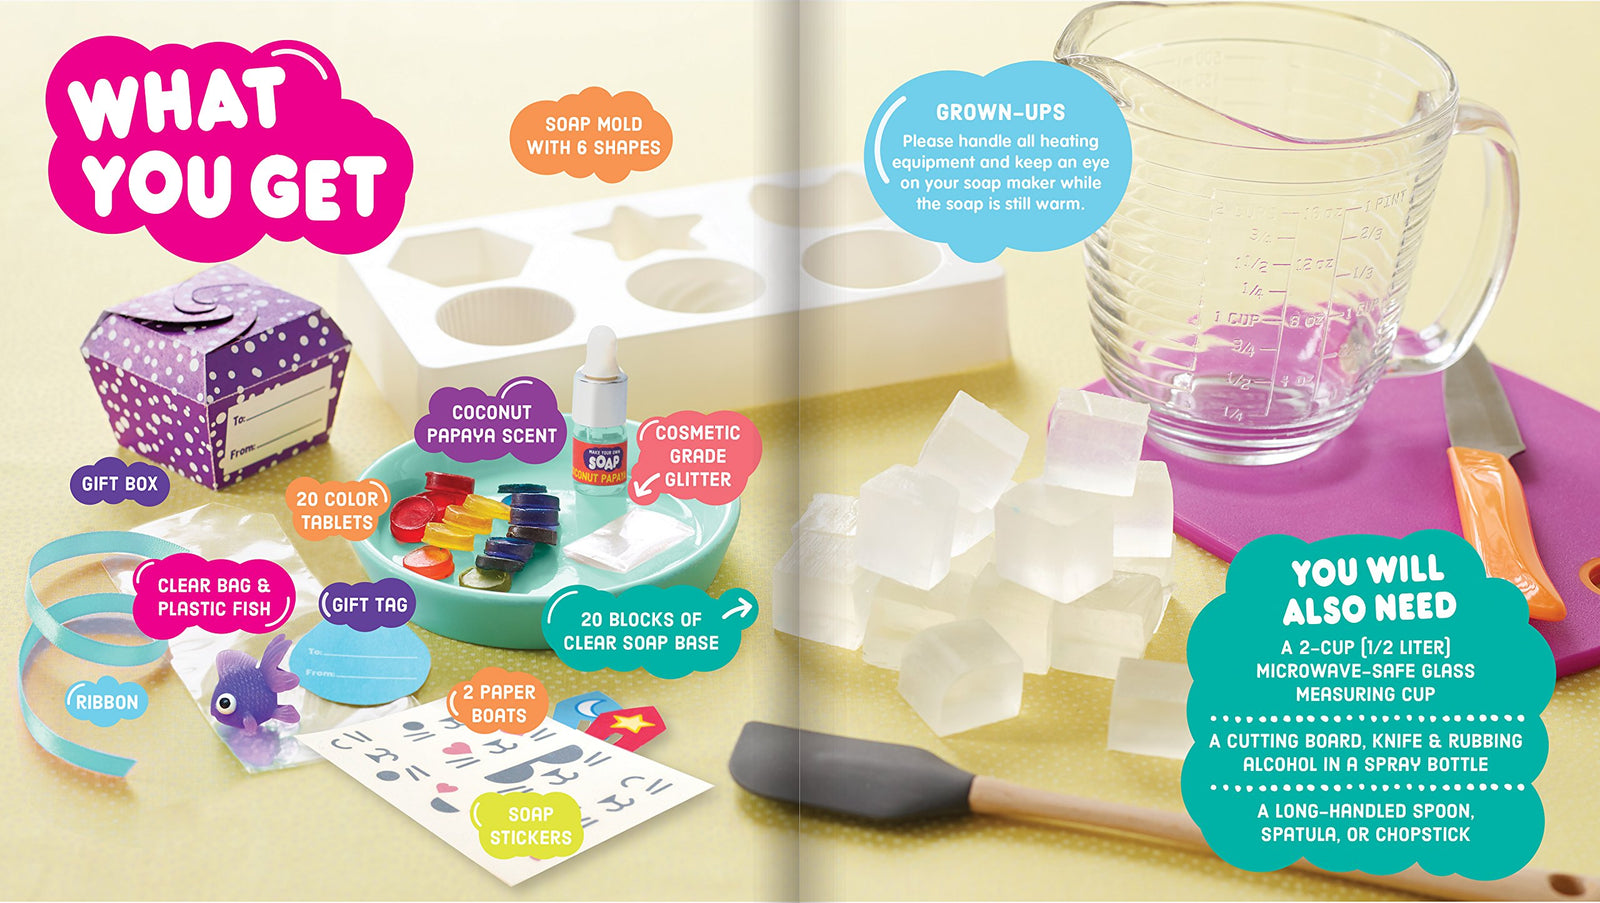 Make Your Own Soap (Klutz Activity Kit)